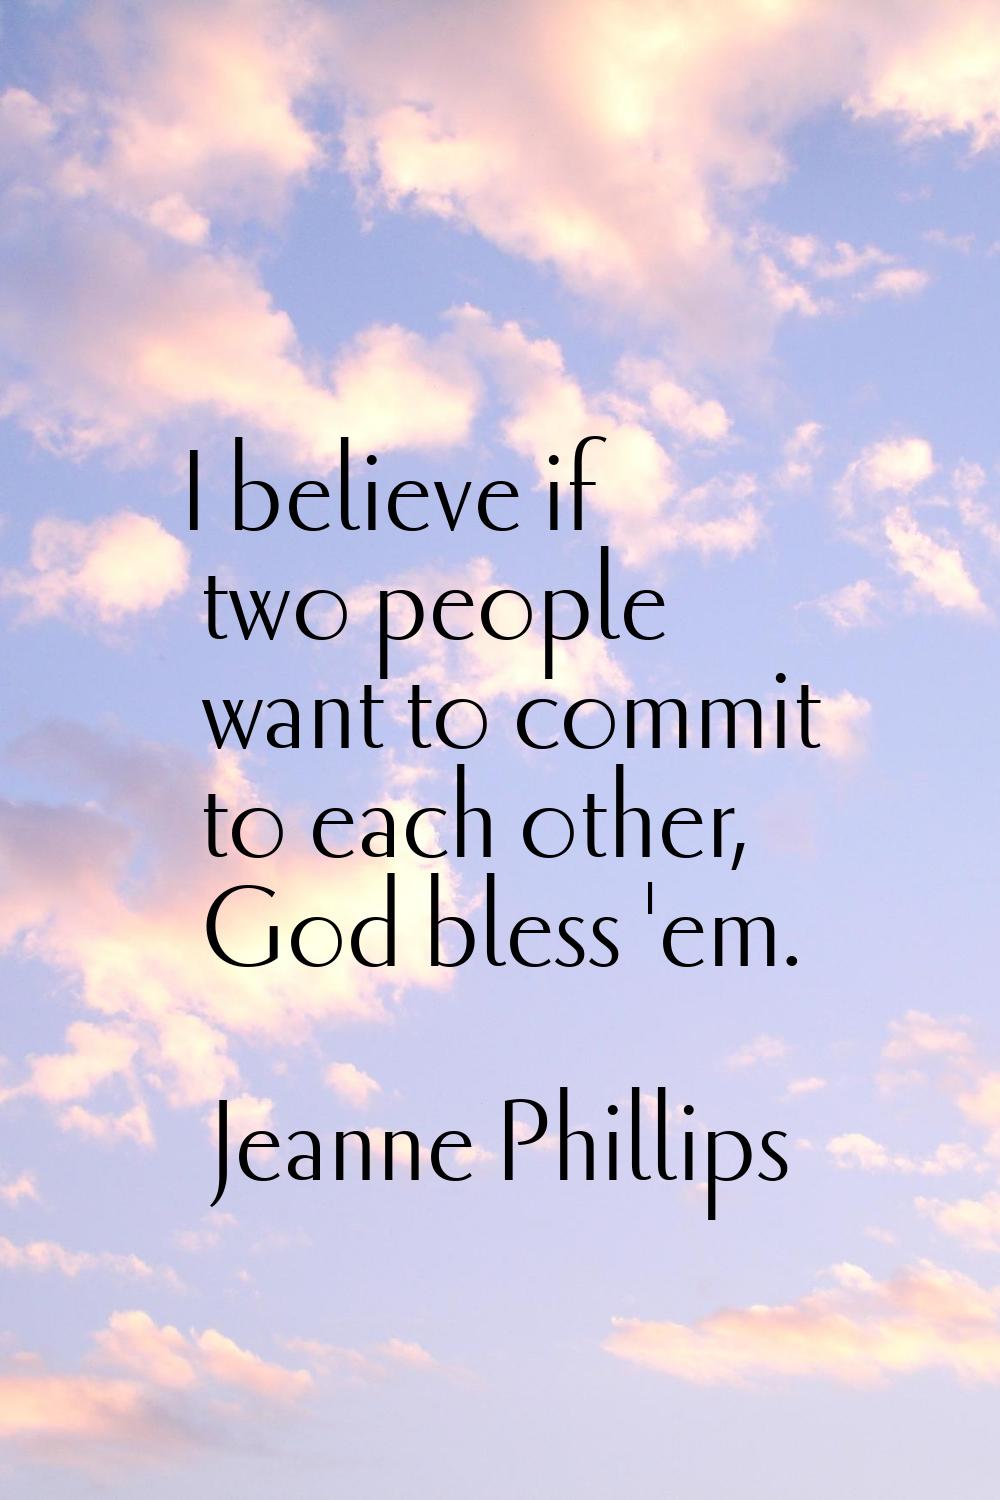 I believe if two people want to commit to each other, God bless 'em.